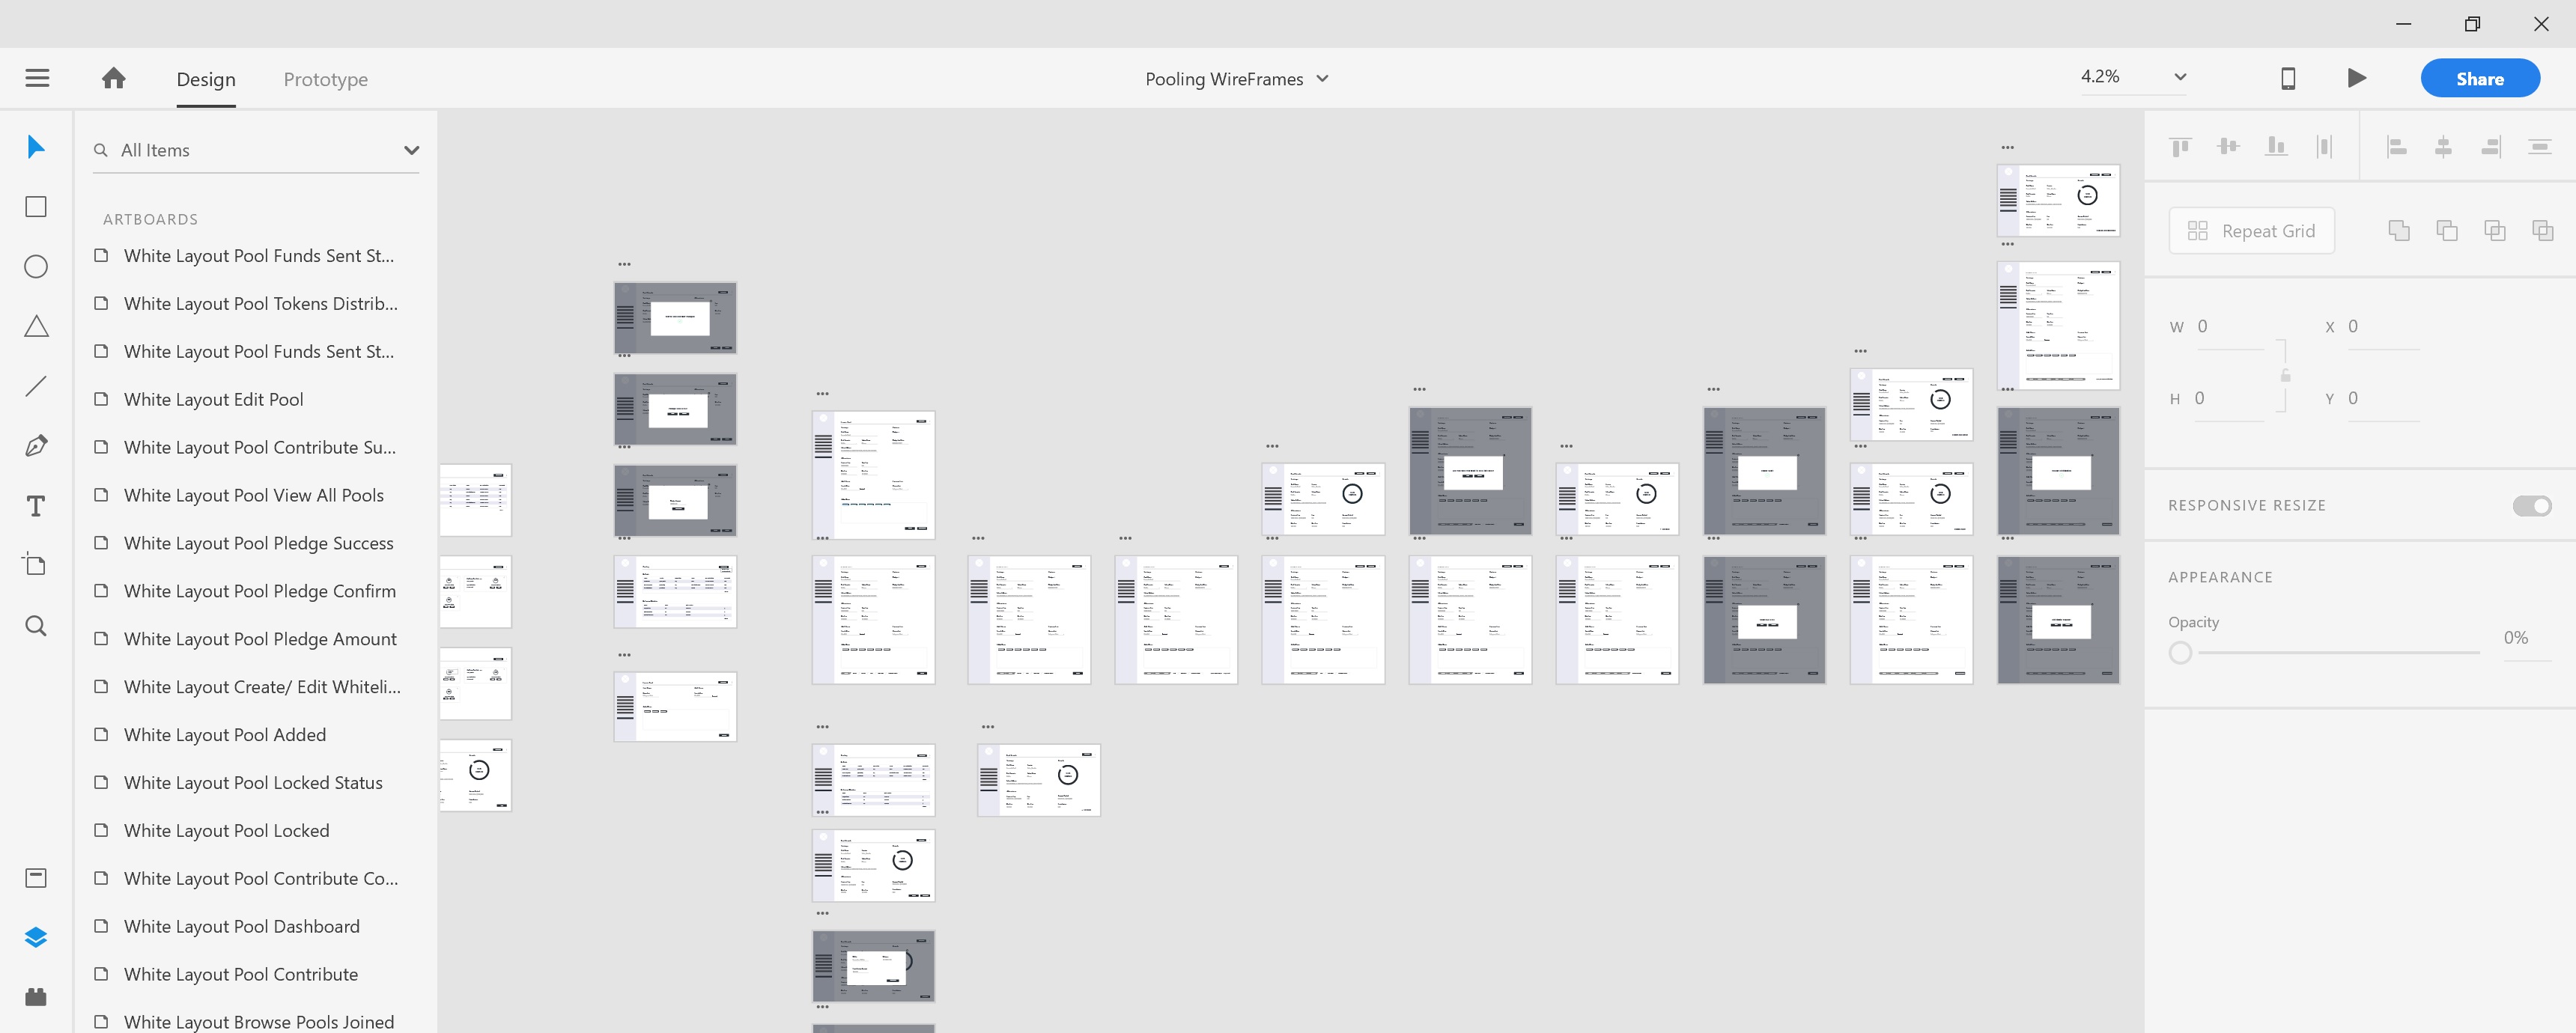 Pooling Wireframes